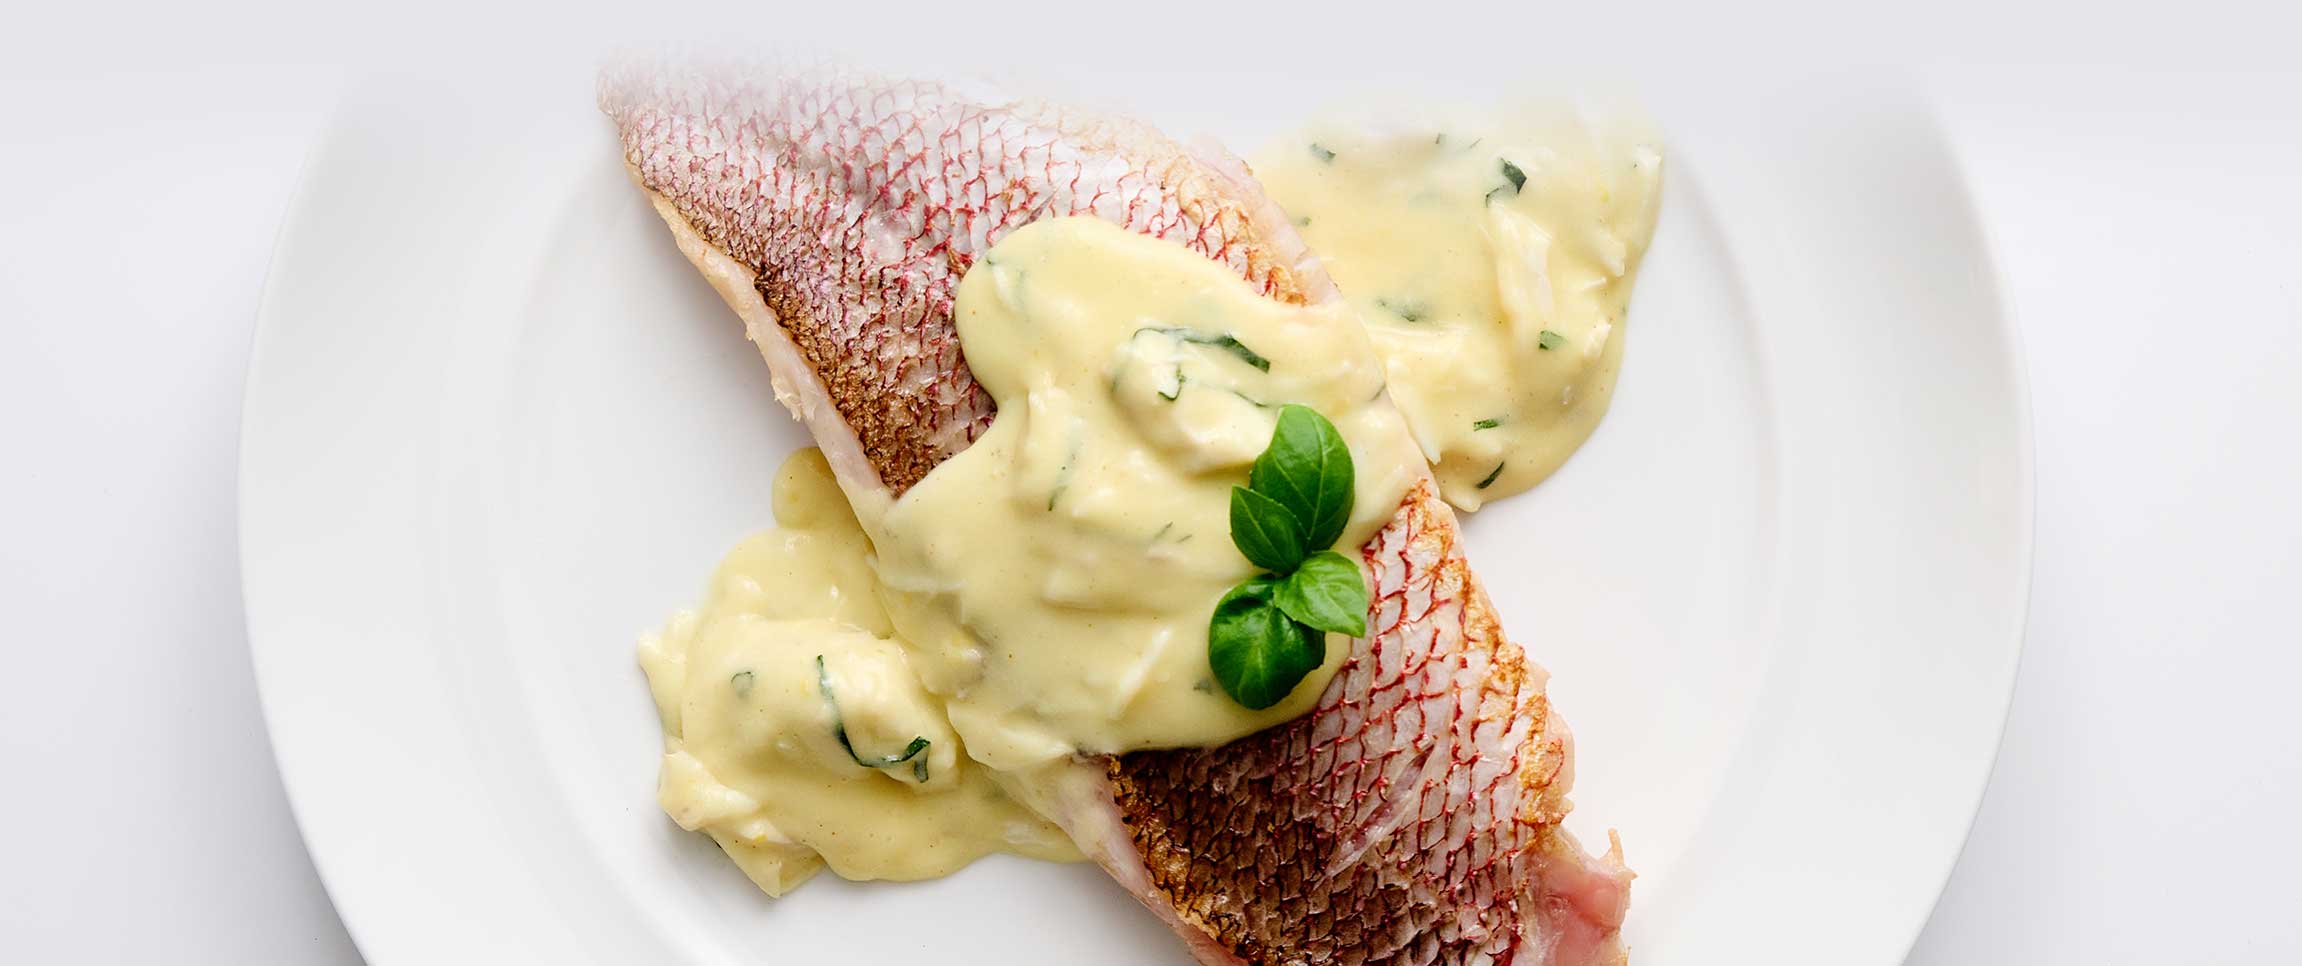 Snapper with Crab Meat Hollandaise